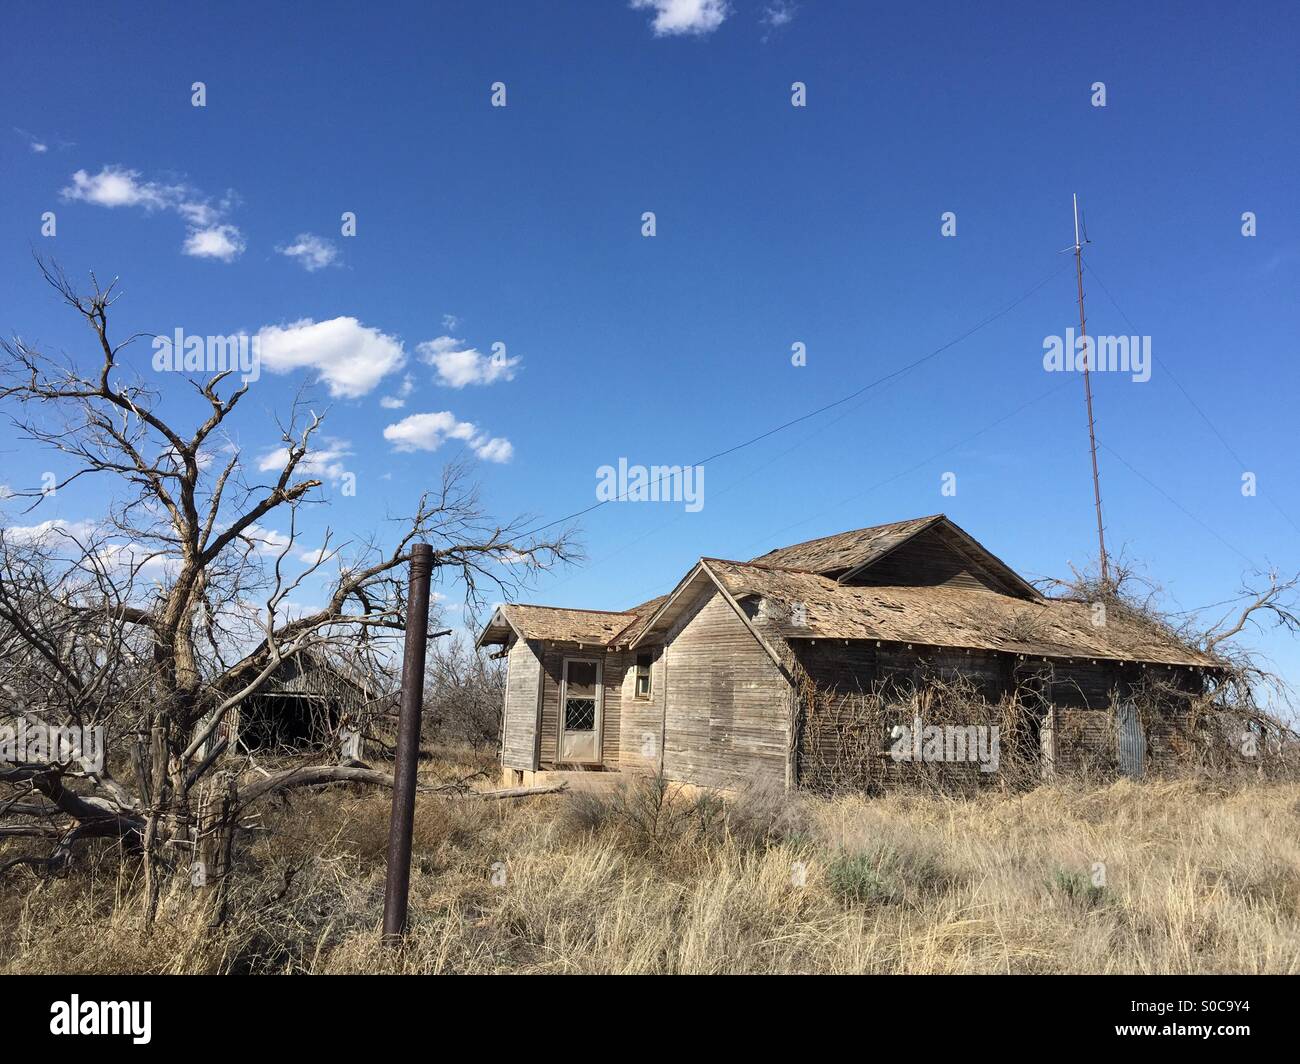 Abandoned home in rural Texas Stock Photo